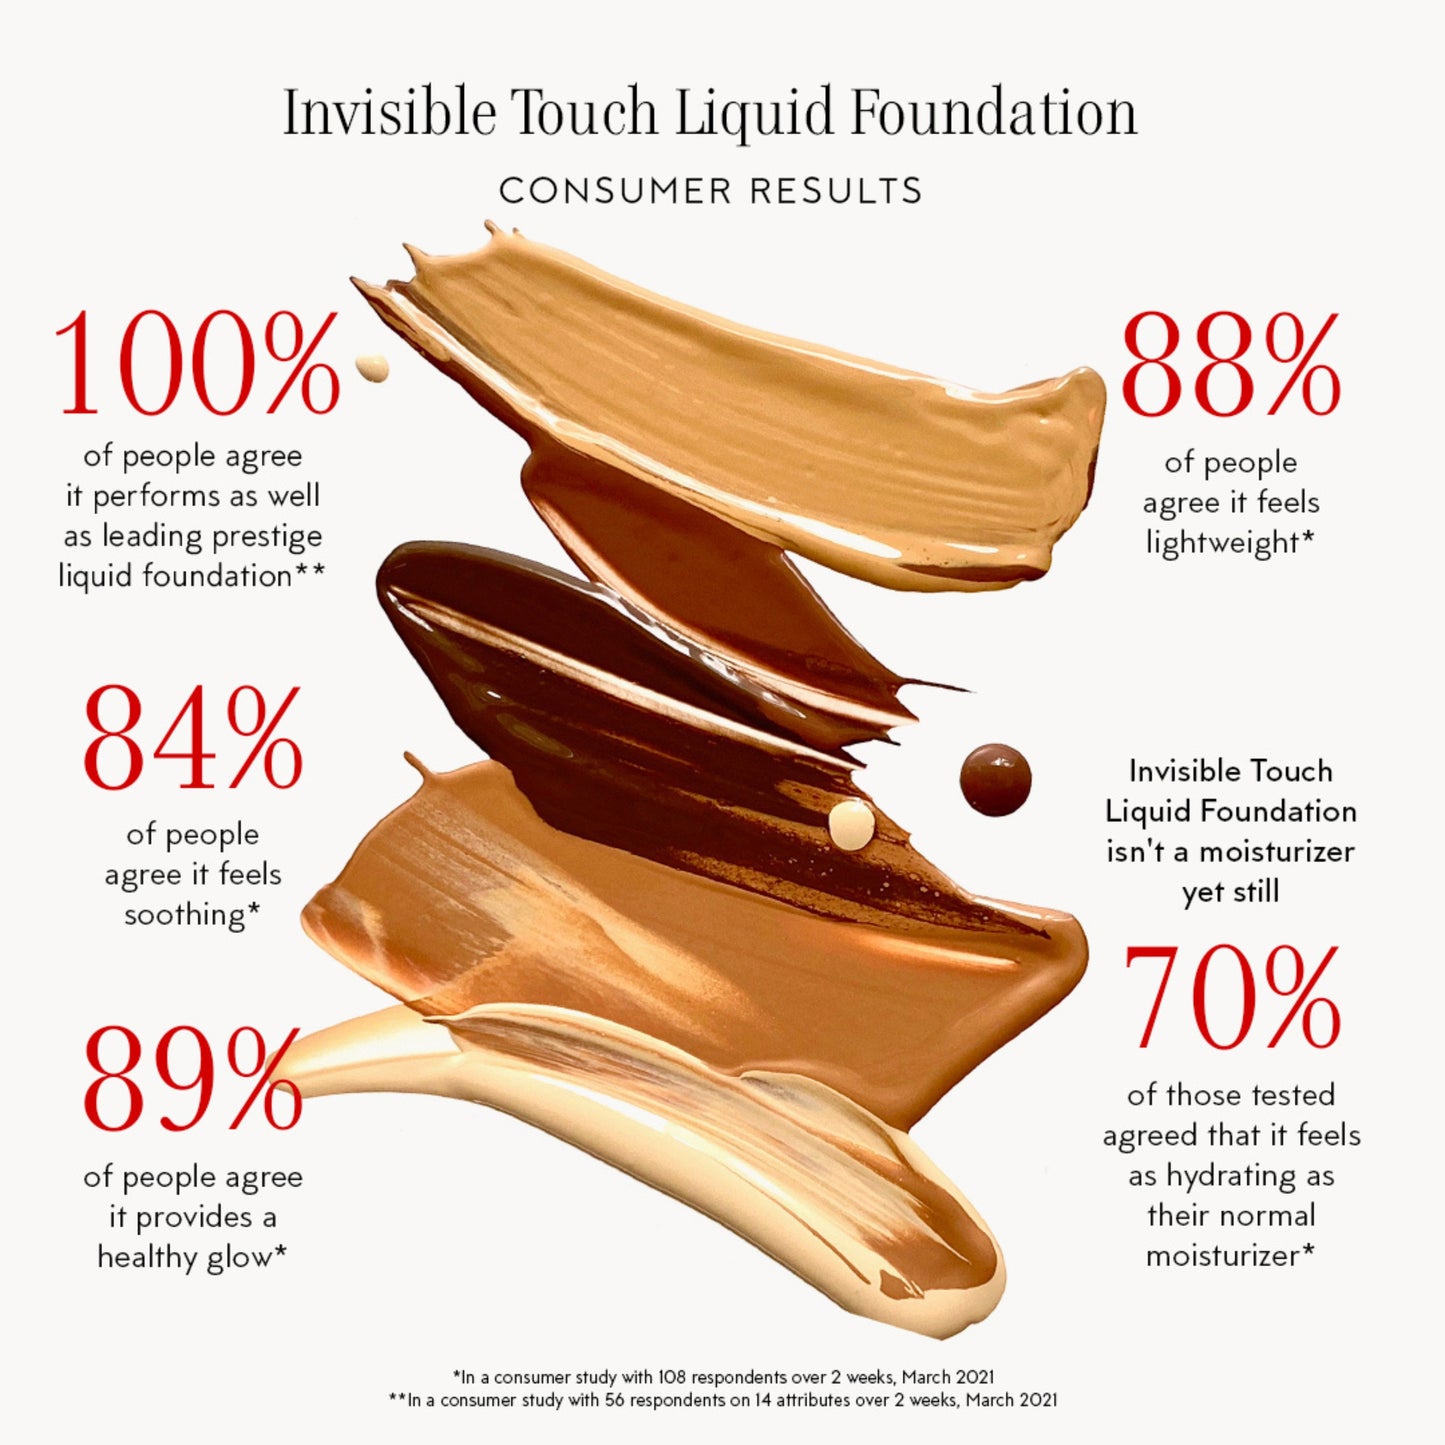 Wipes of liquid foundation. Text reads: 100% of people agree it performs as well as leading prestige liquid foundation**. 88% agree its lightweight*. 84% agree its soothing*. 89% agree it provides a healthy glow*. Invisible Touch Liquid Foundation isn’t a moisturizer and yet 70% agreed that it feels as hydrating as their normal moisturizer*. * in a consumer study with 108 respondents over 2 weeks, March 2021. ** in a consumer study with 56 respondents on 14 attributes over 2 weeks, March 2021